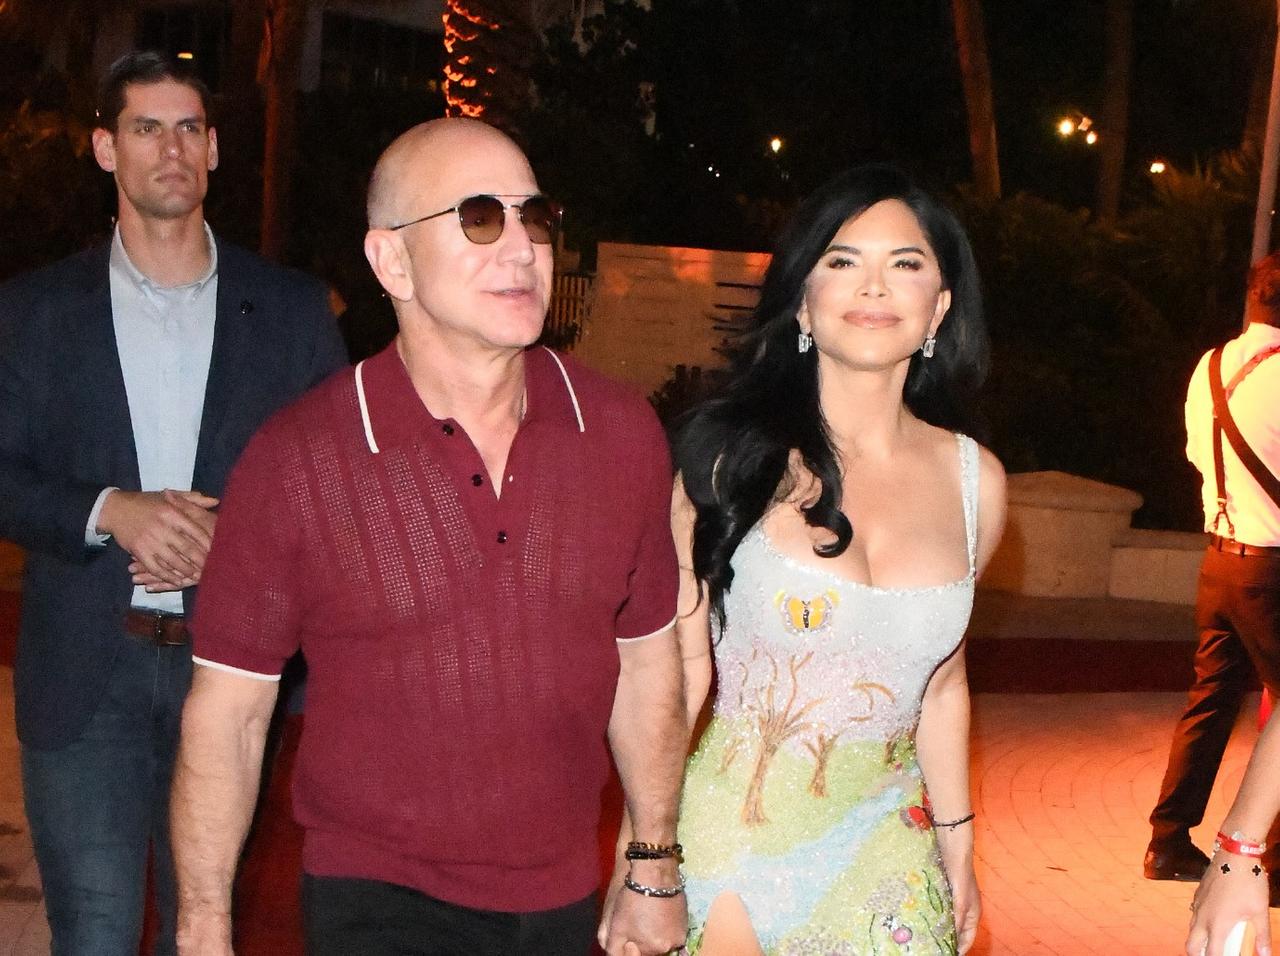 Jeff Bezos & Lauren Sanchez Engaged After 5 Years Of Dating: Report